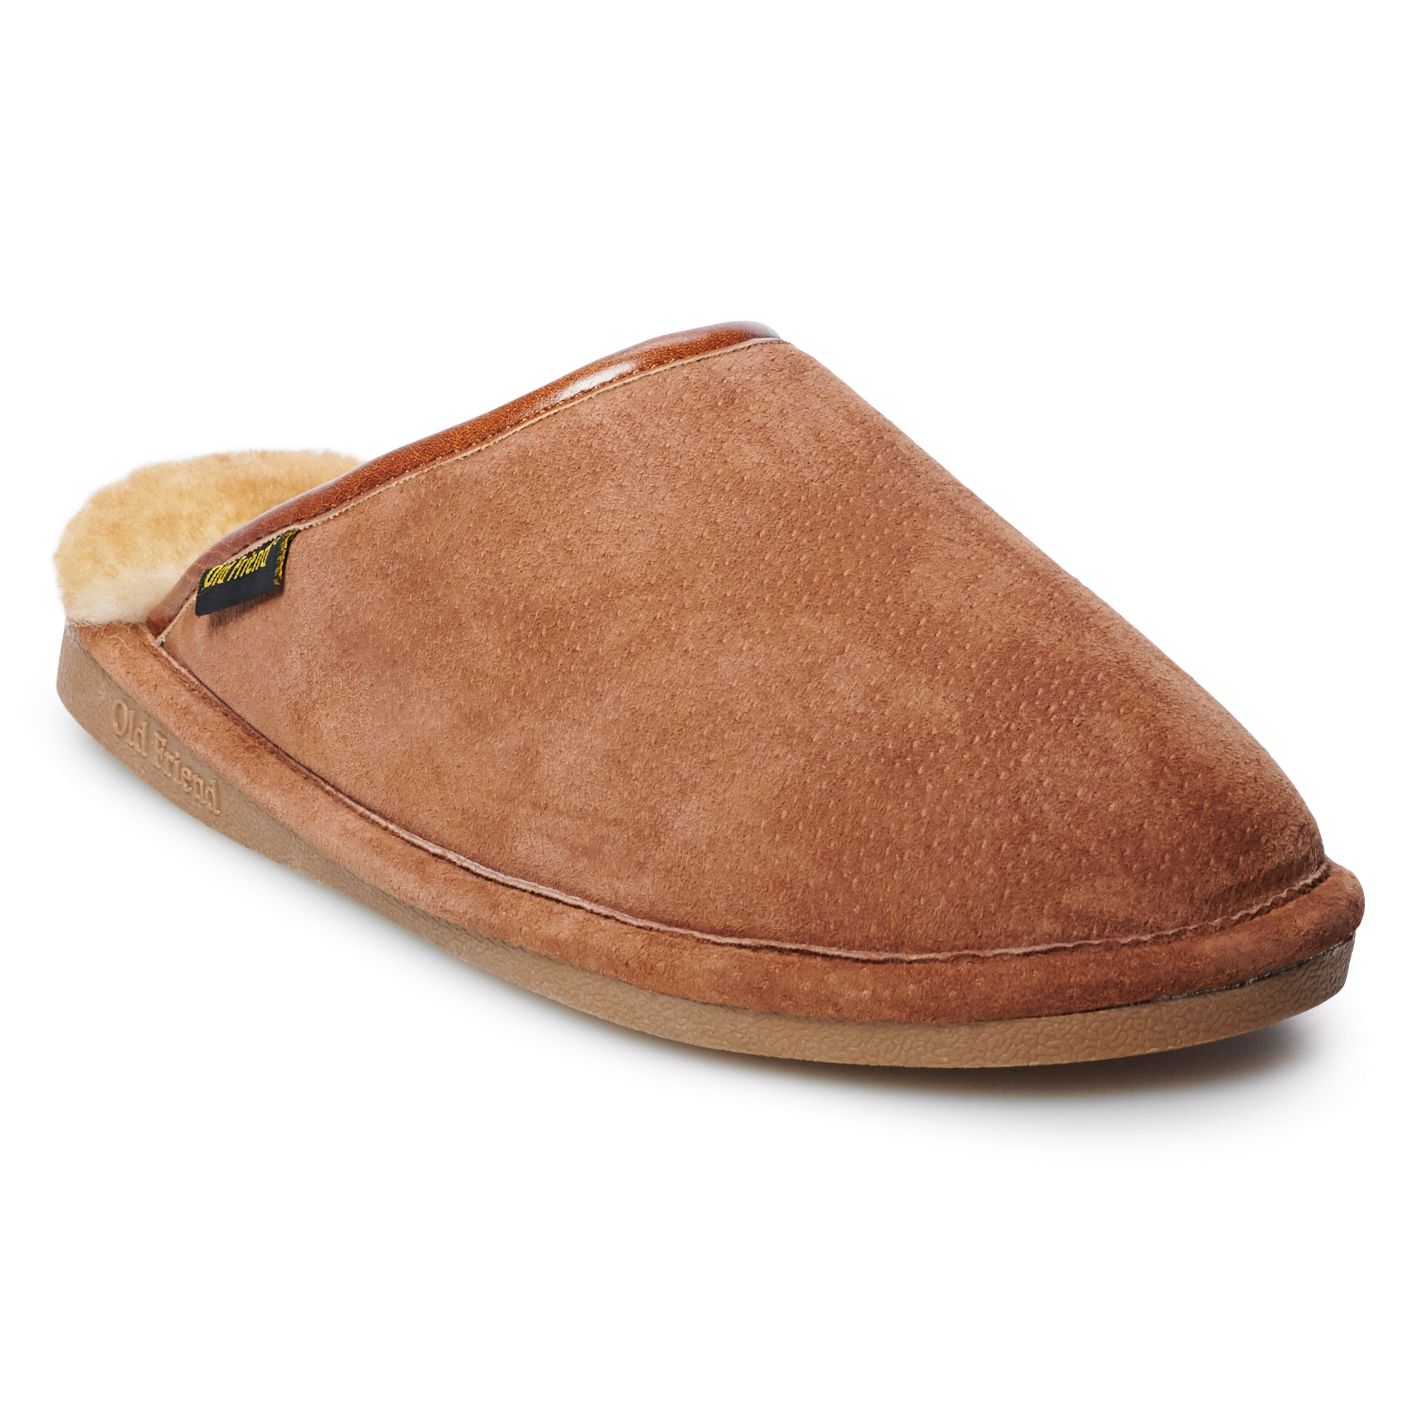 old friend mens slippers